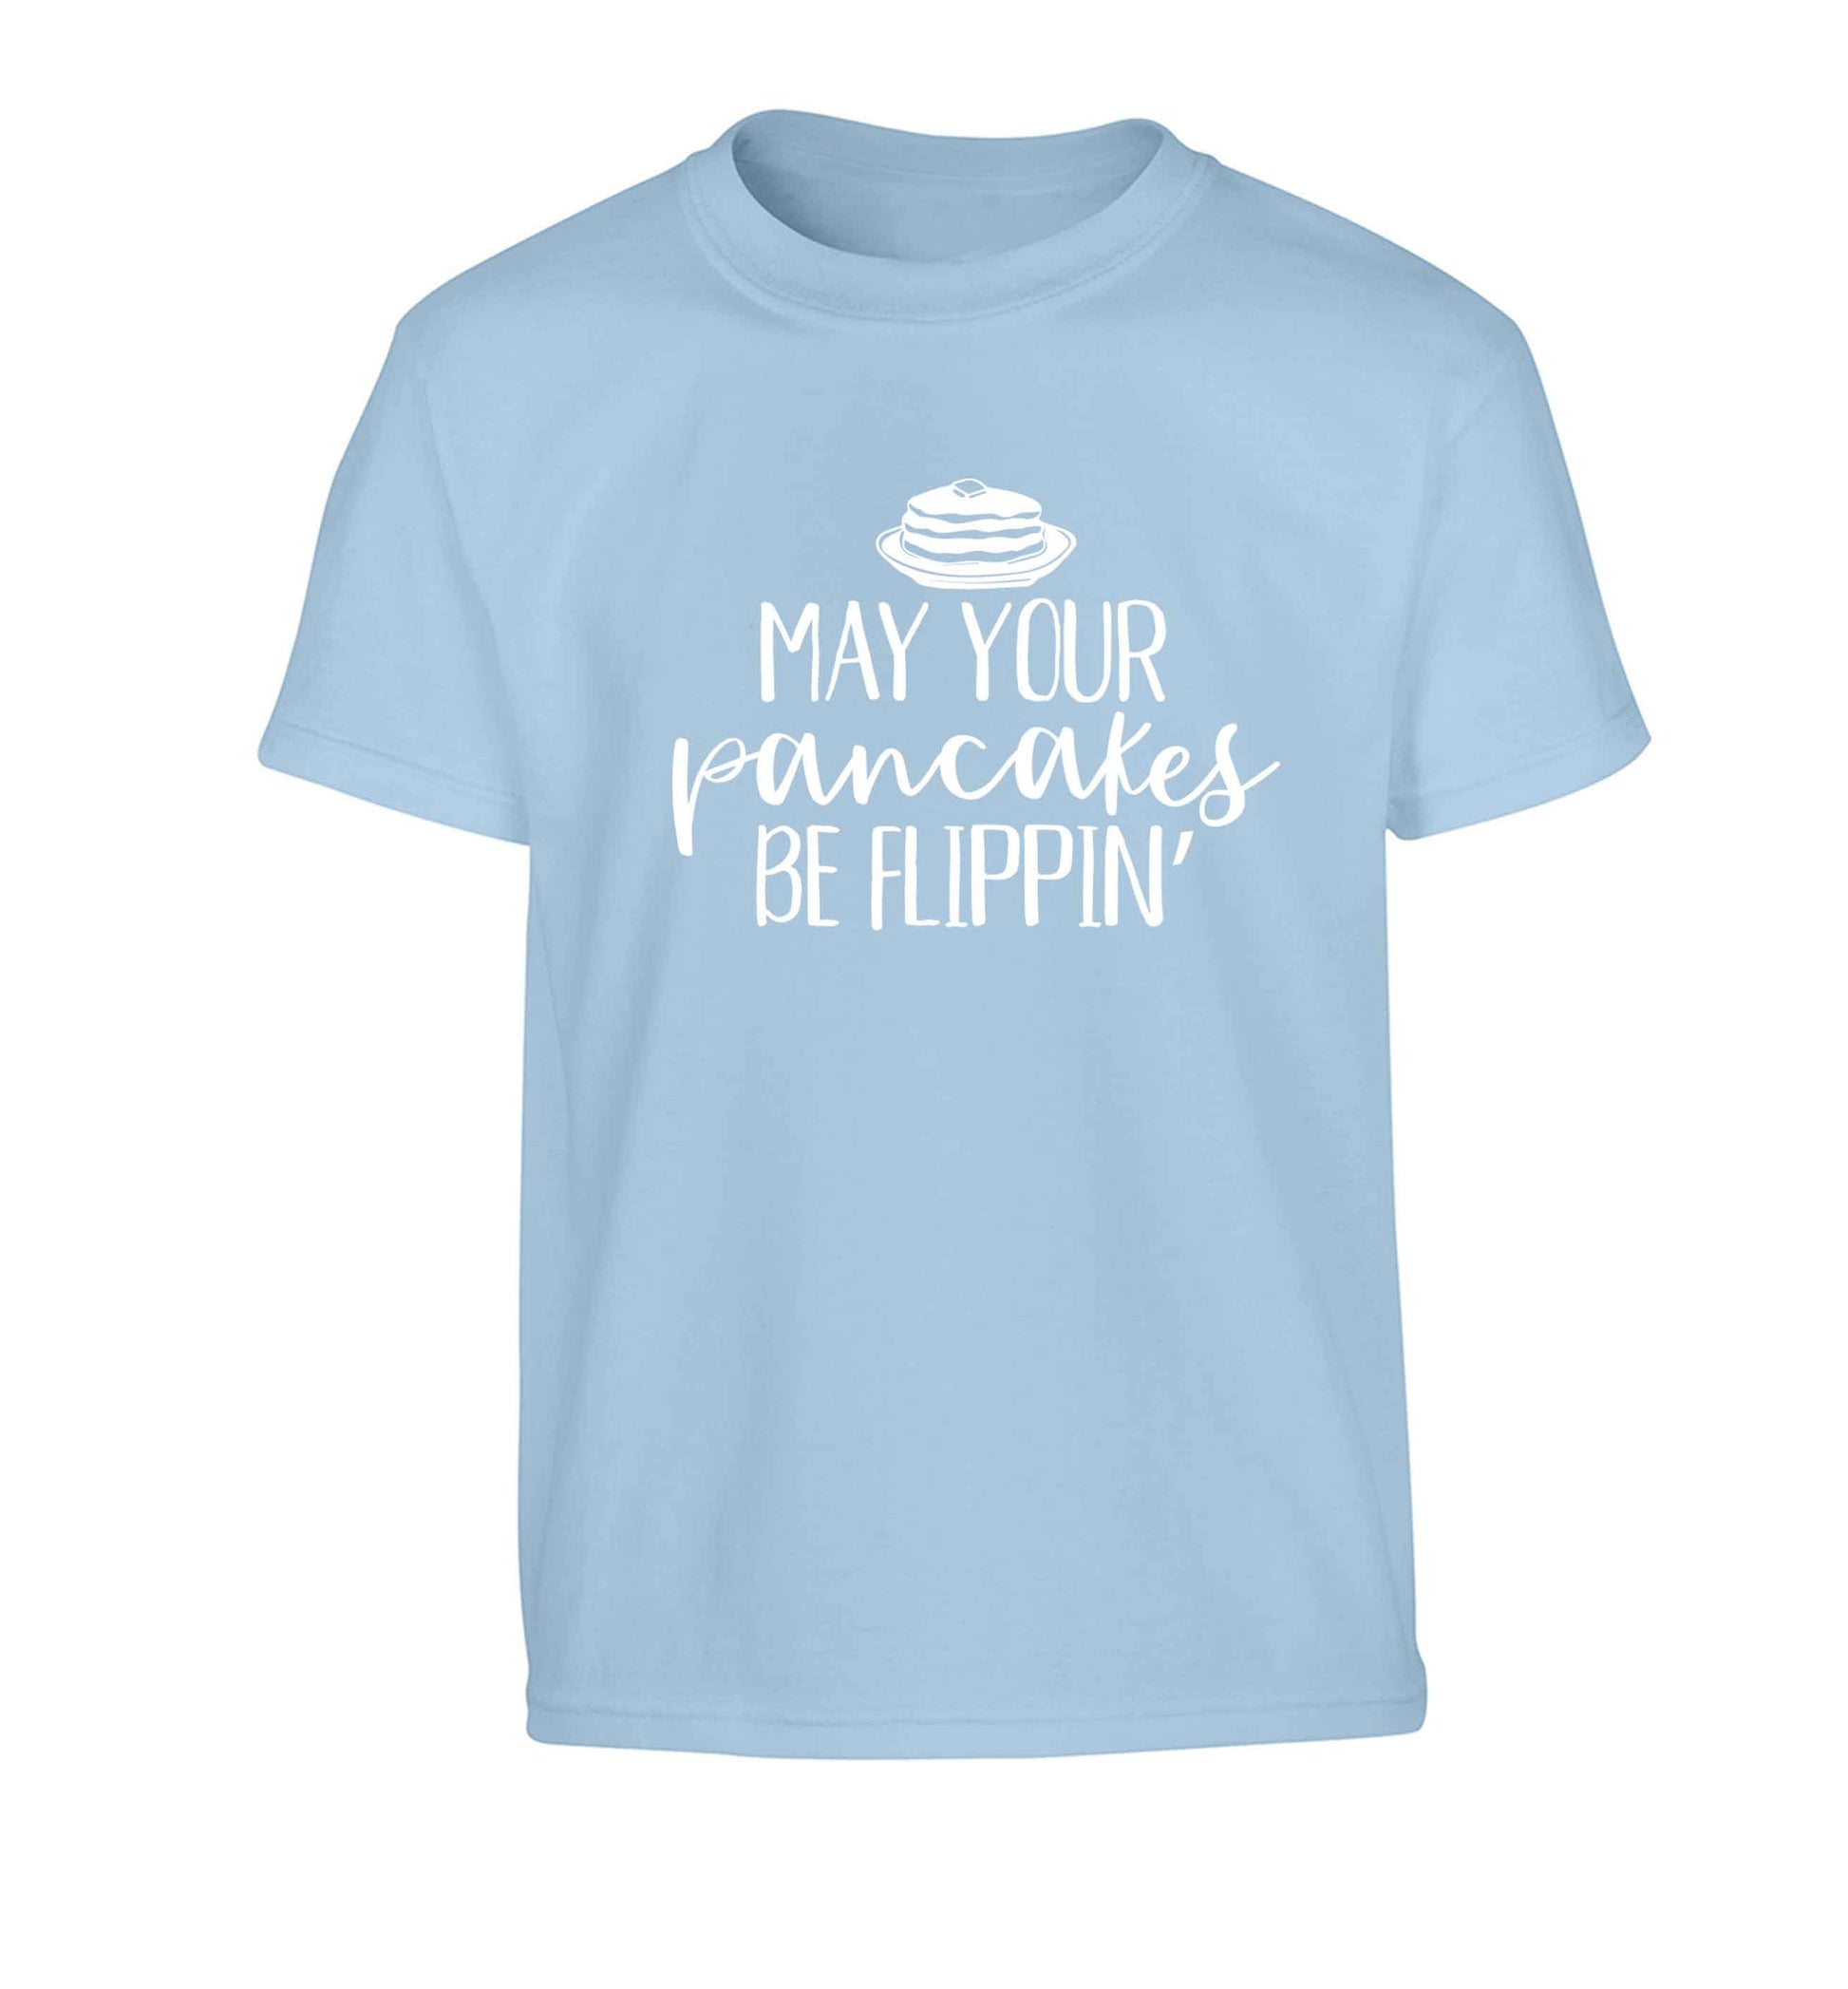 May your pancakes be flippin' Children's light blue Tshirt 12-13 Years